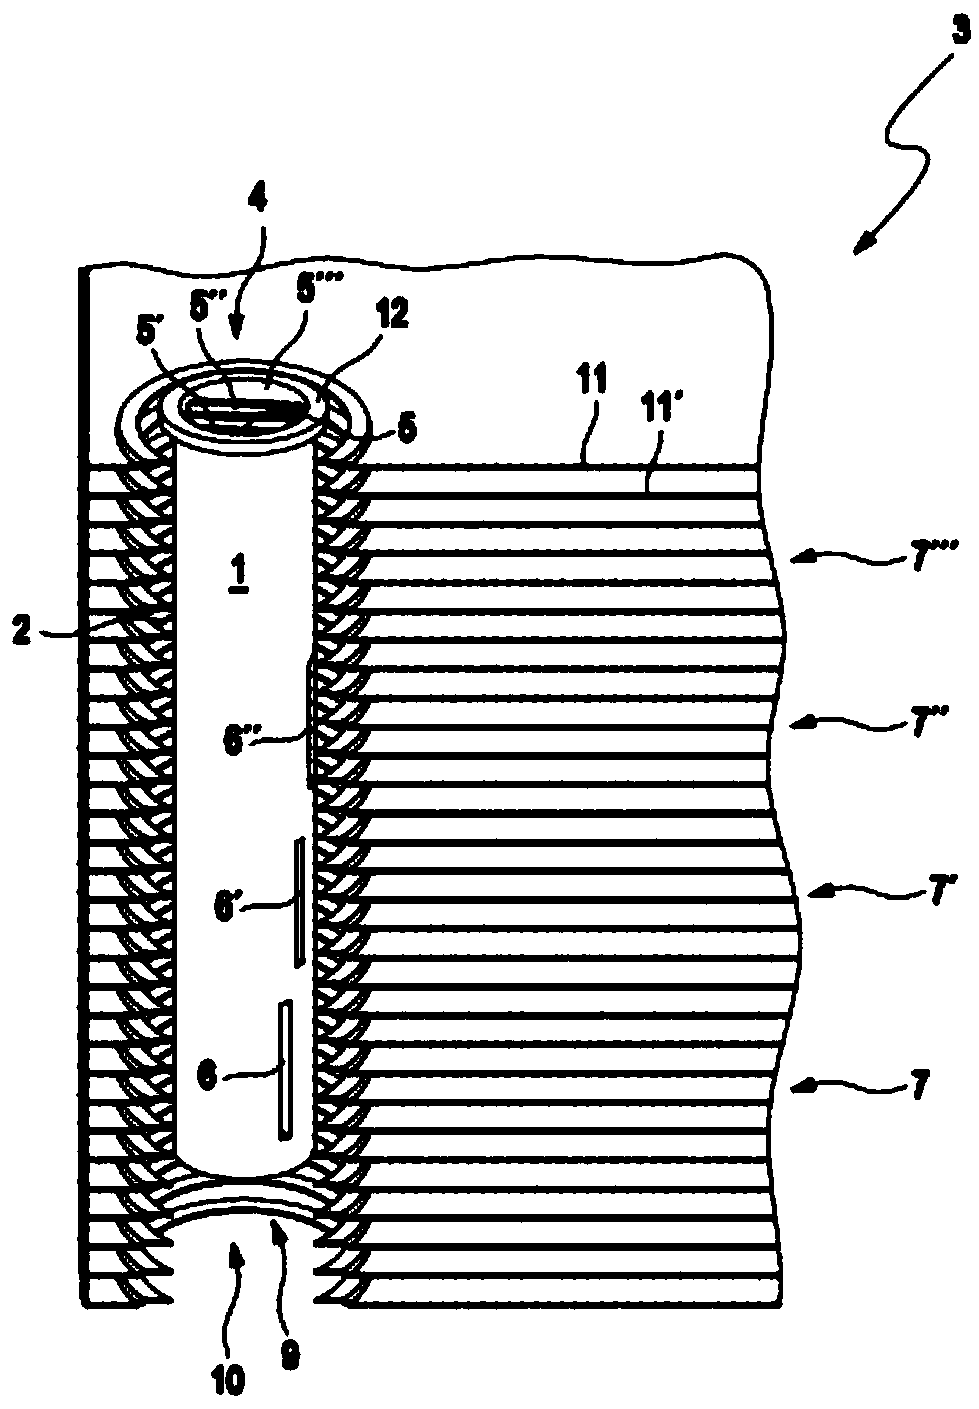 Liner tube for inlet channel of plate heat exchanger